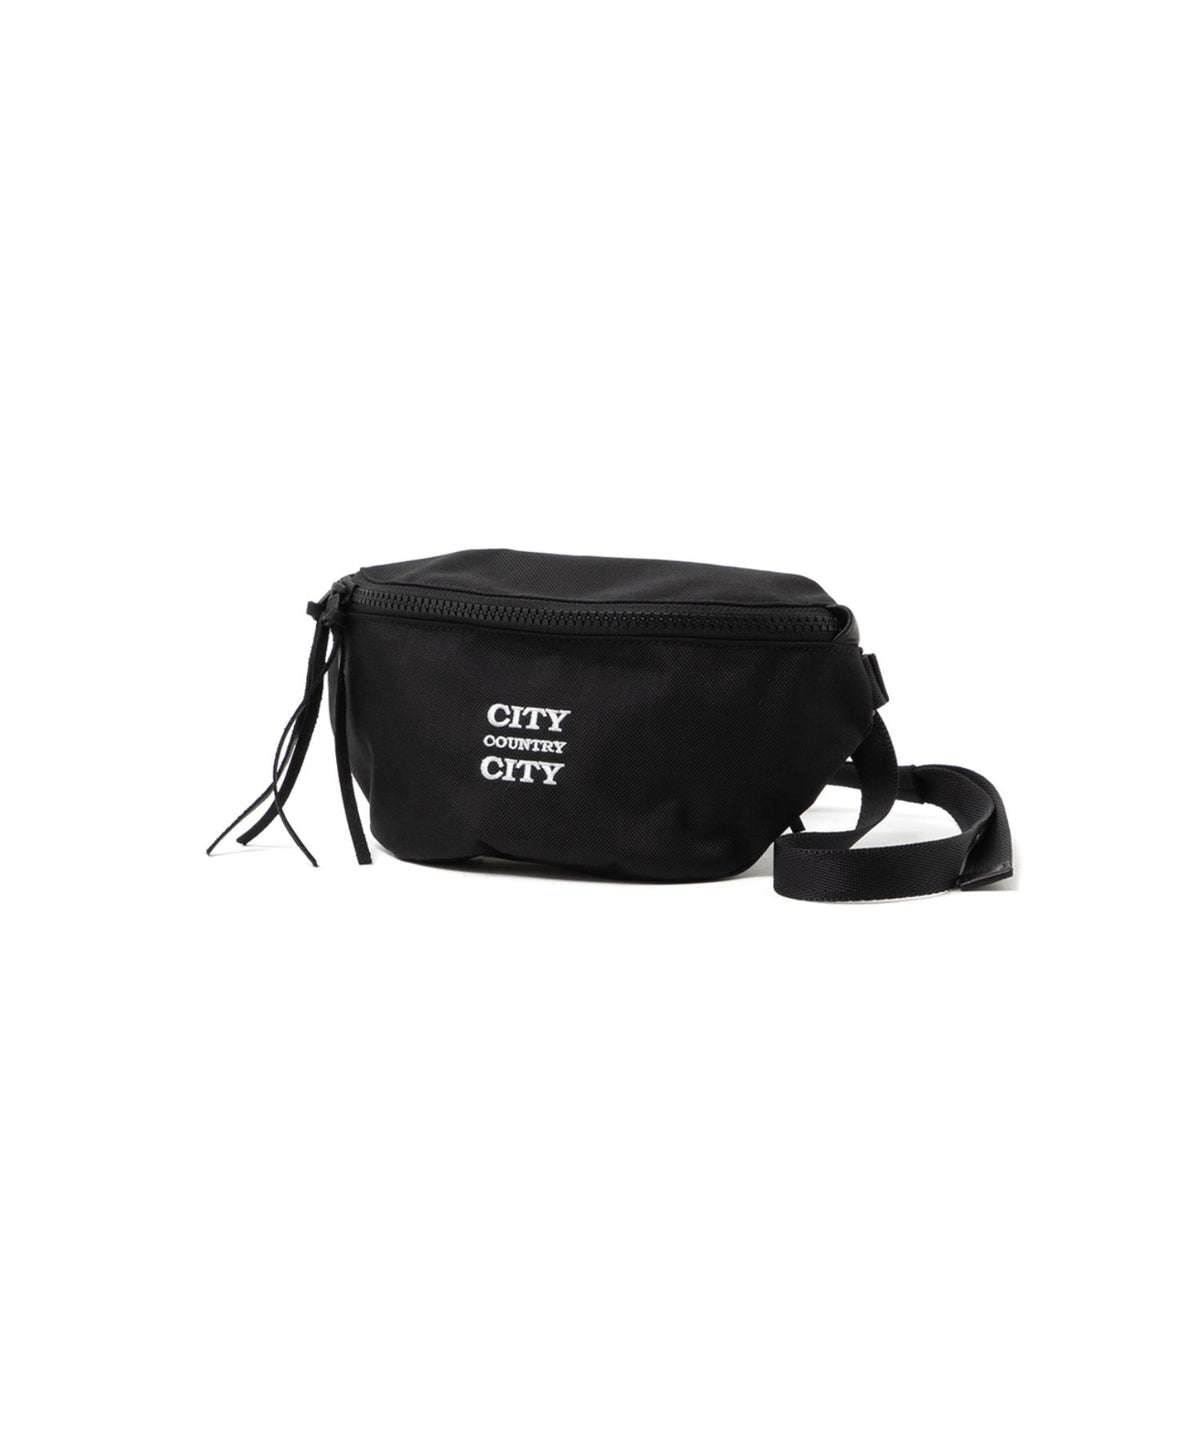 Everyday Waist Pouch Nylon Oxford For City Country City